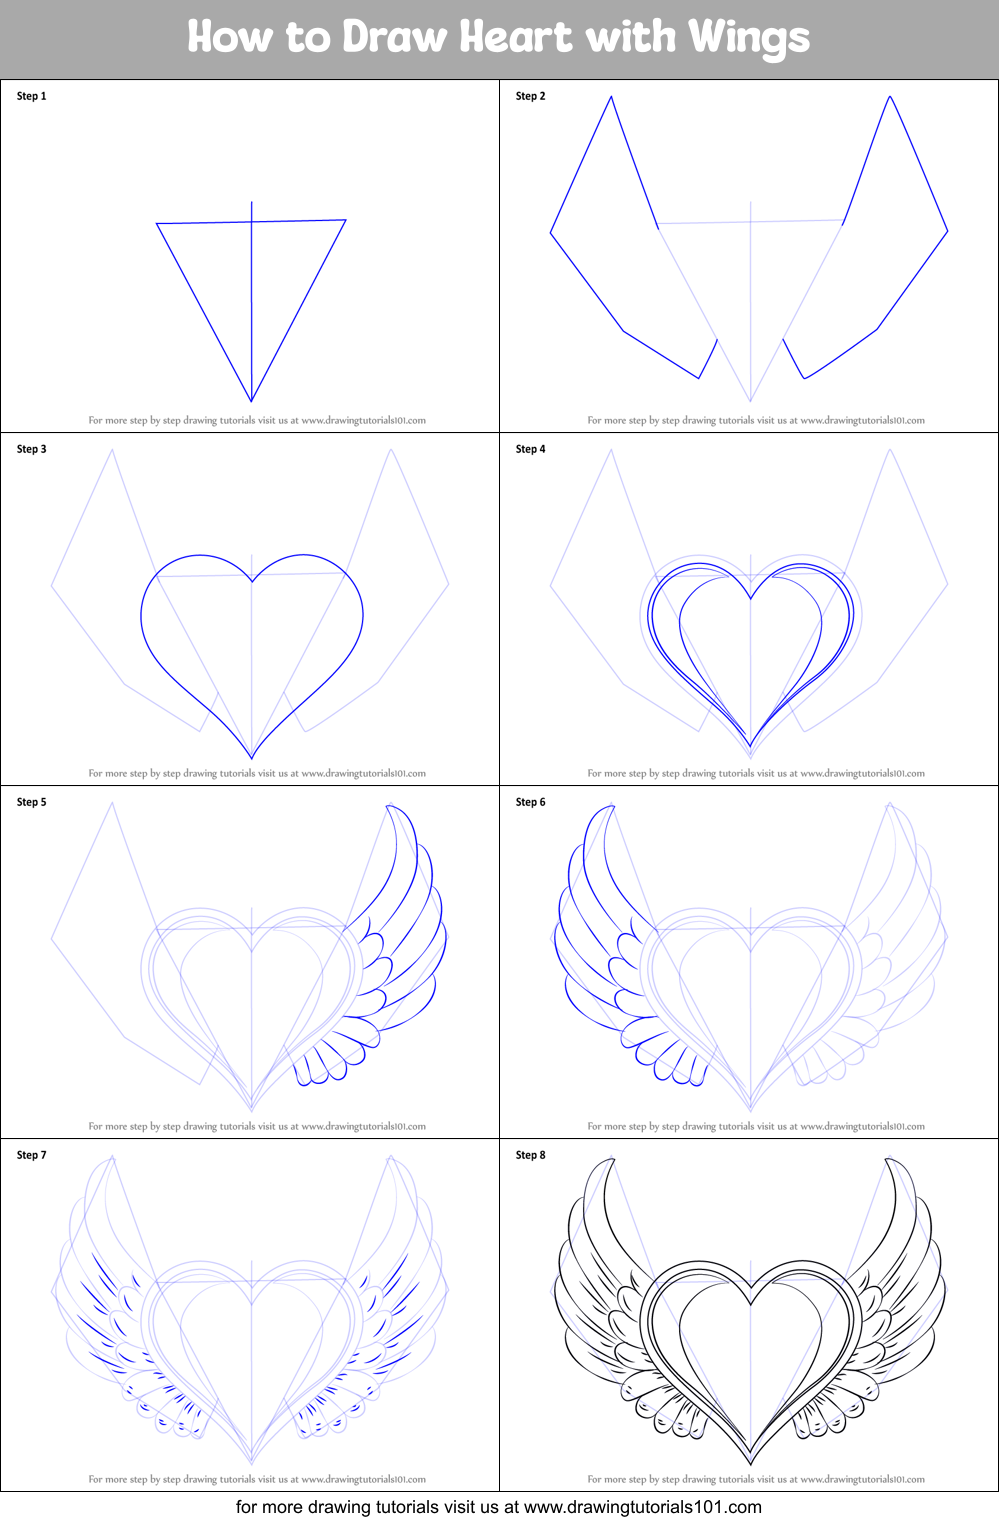 How to Draw Heart with Wings printable step by step sheet : DrawingTutorials101.com